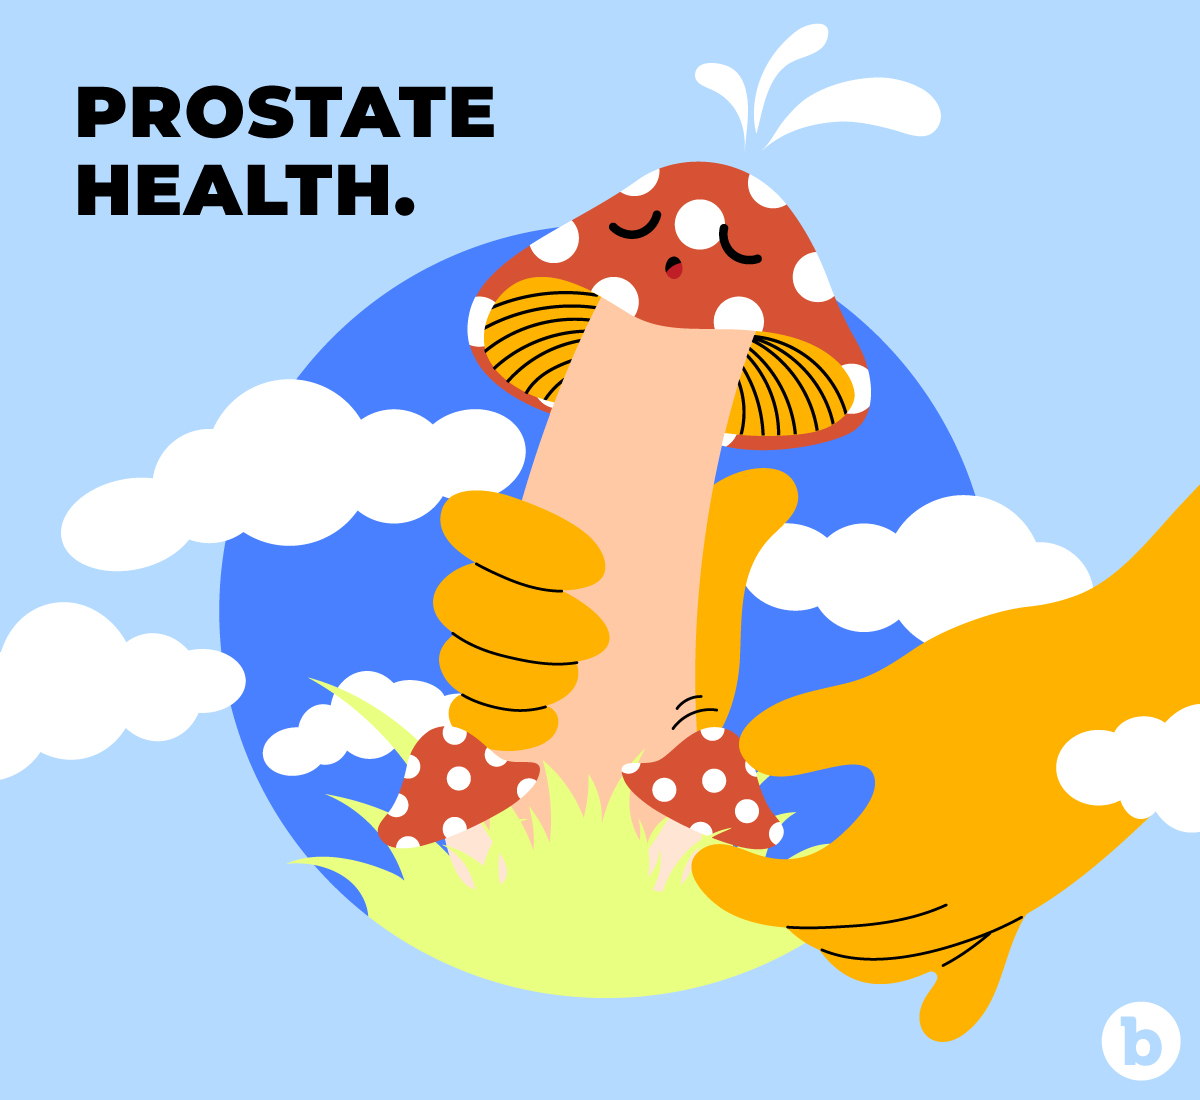 Prostate play has scientifically been proven to have multiple health benefits